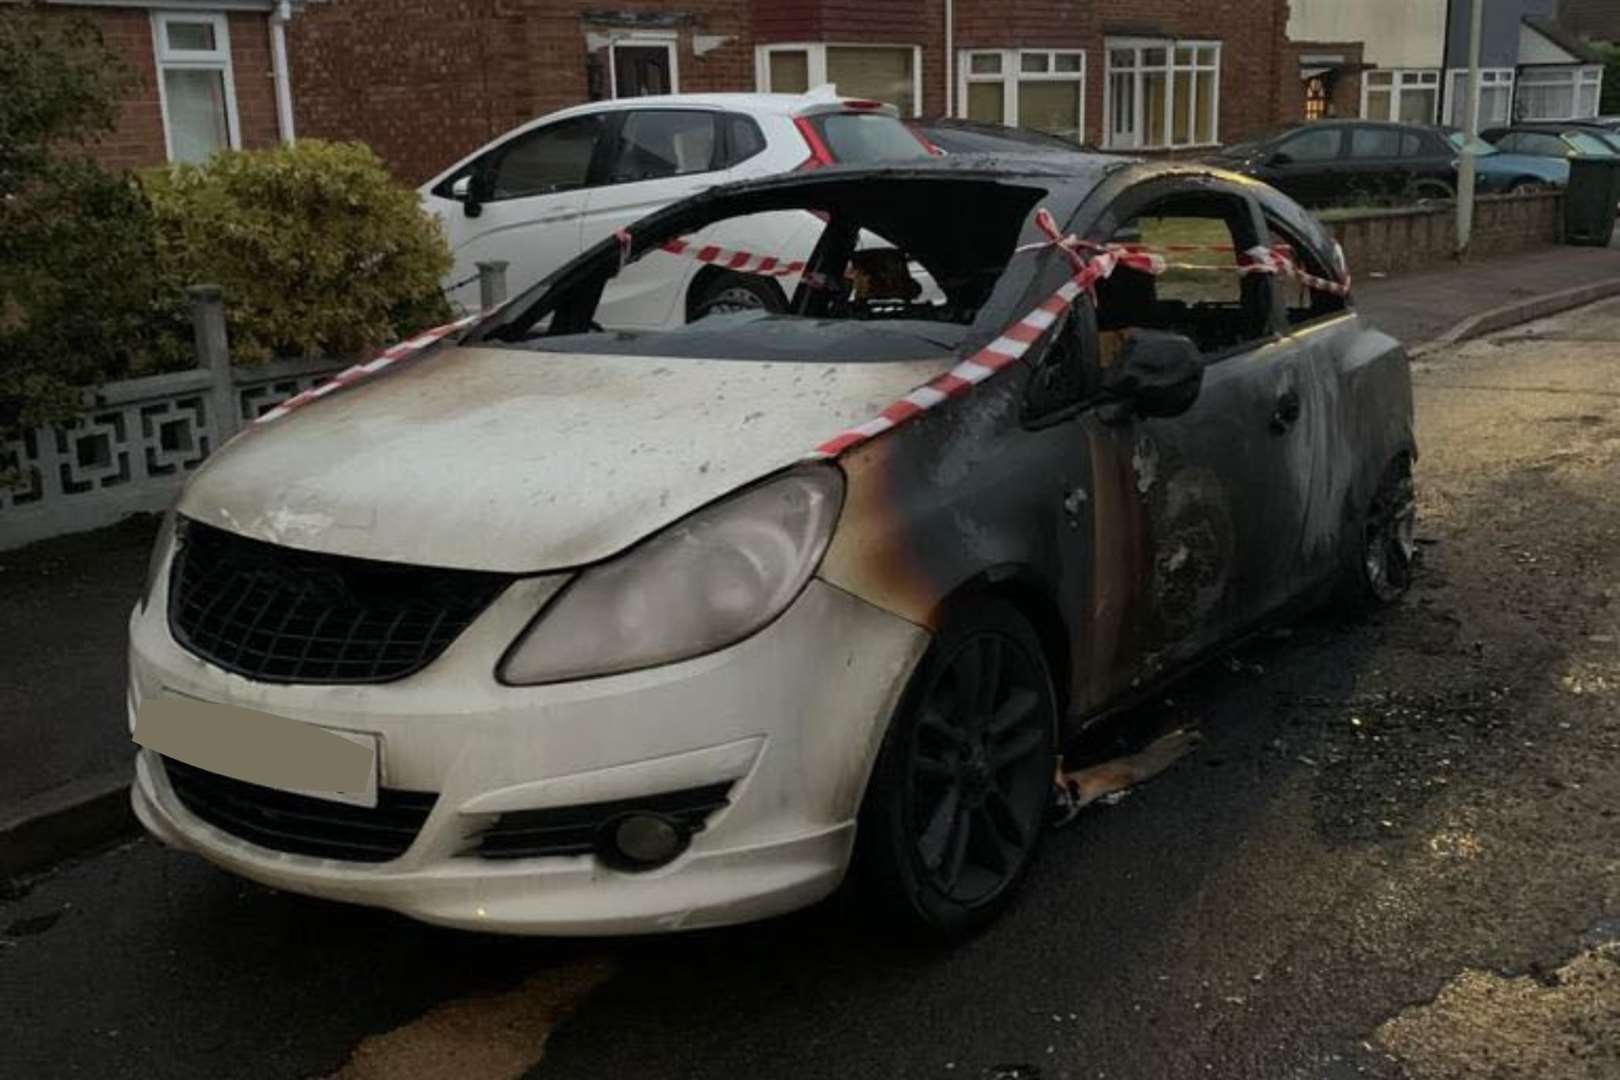 Fire crews believe the car was set on fire deliberately